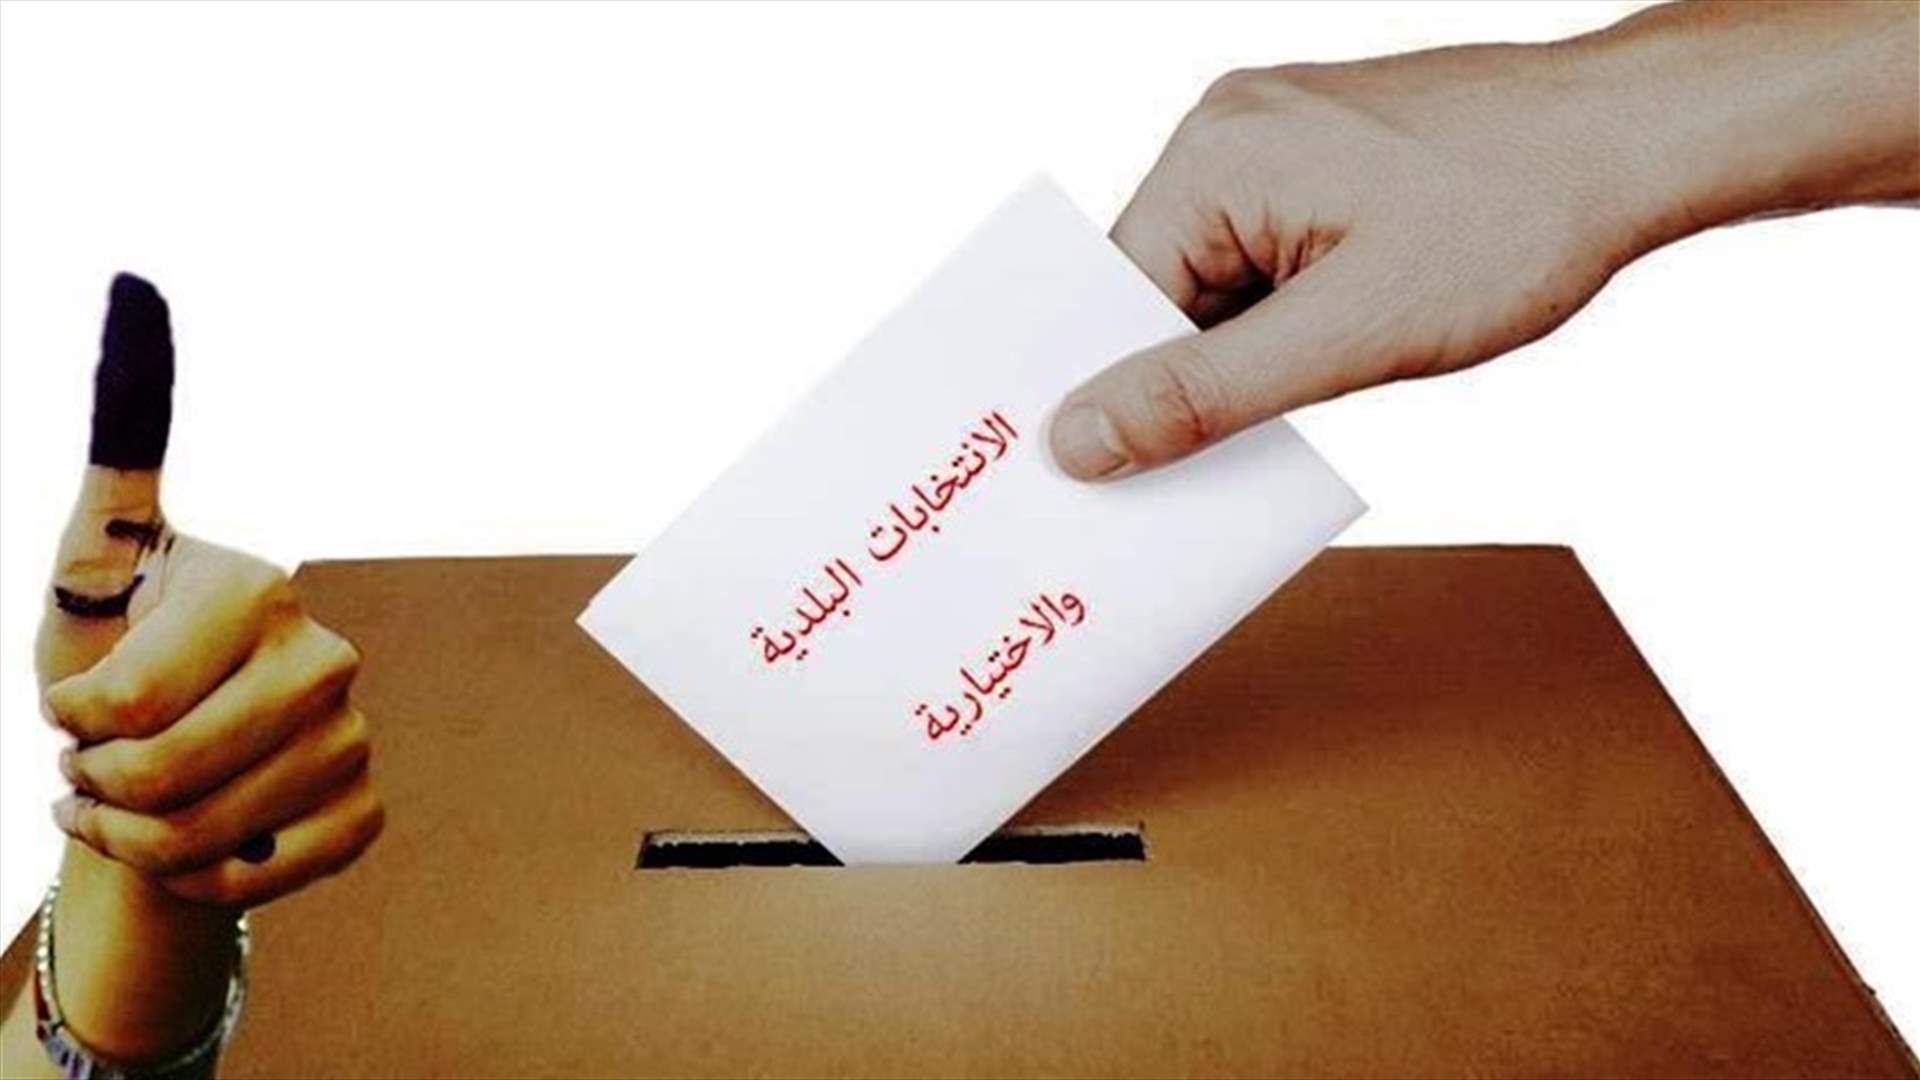 End of legal deadline to withdraw candidature for Bekaa elections